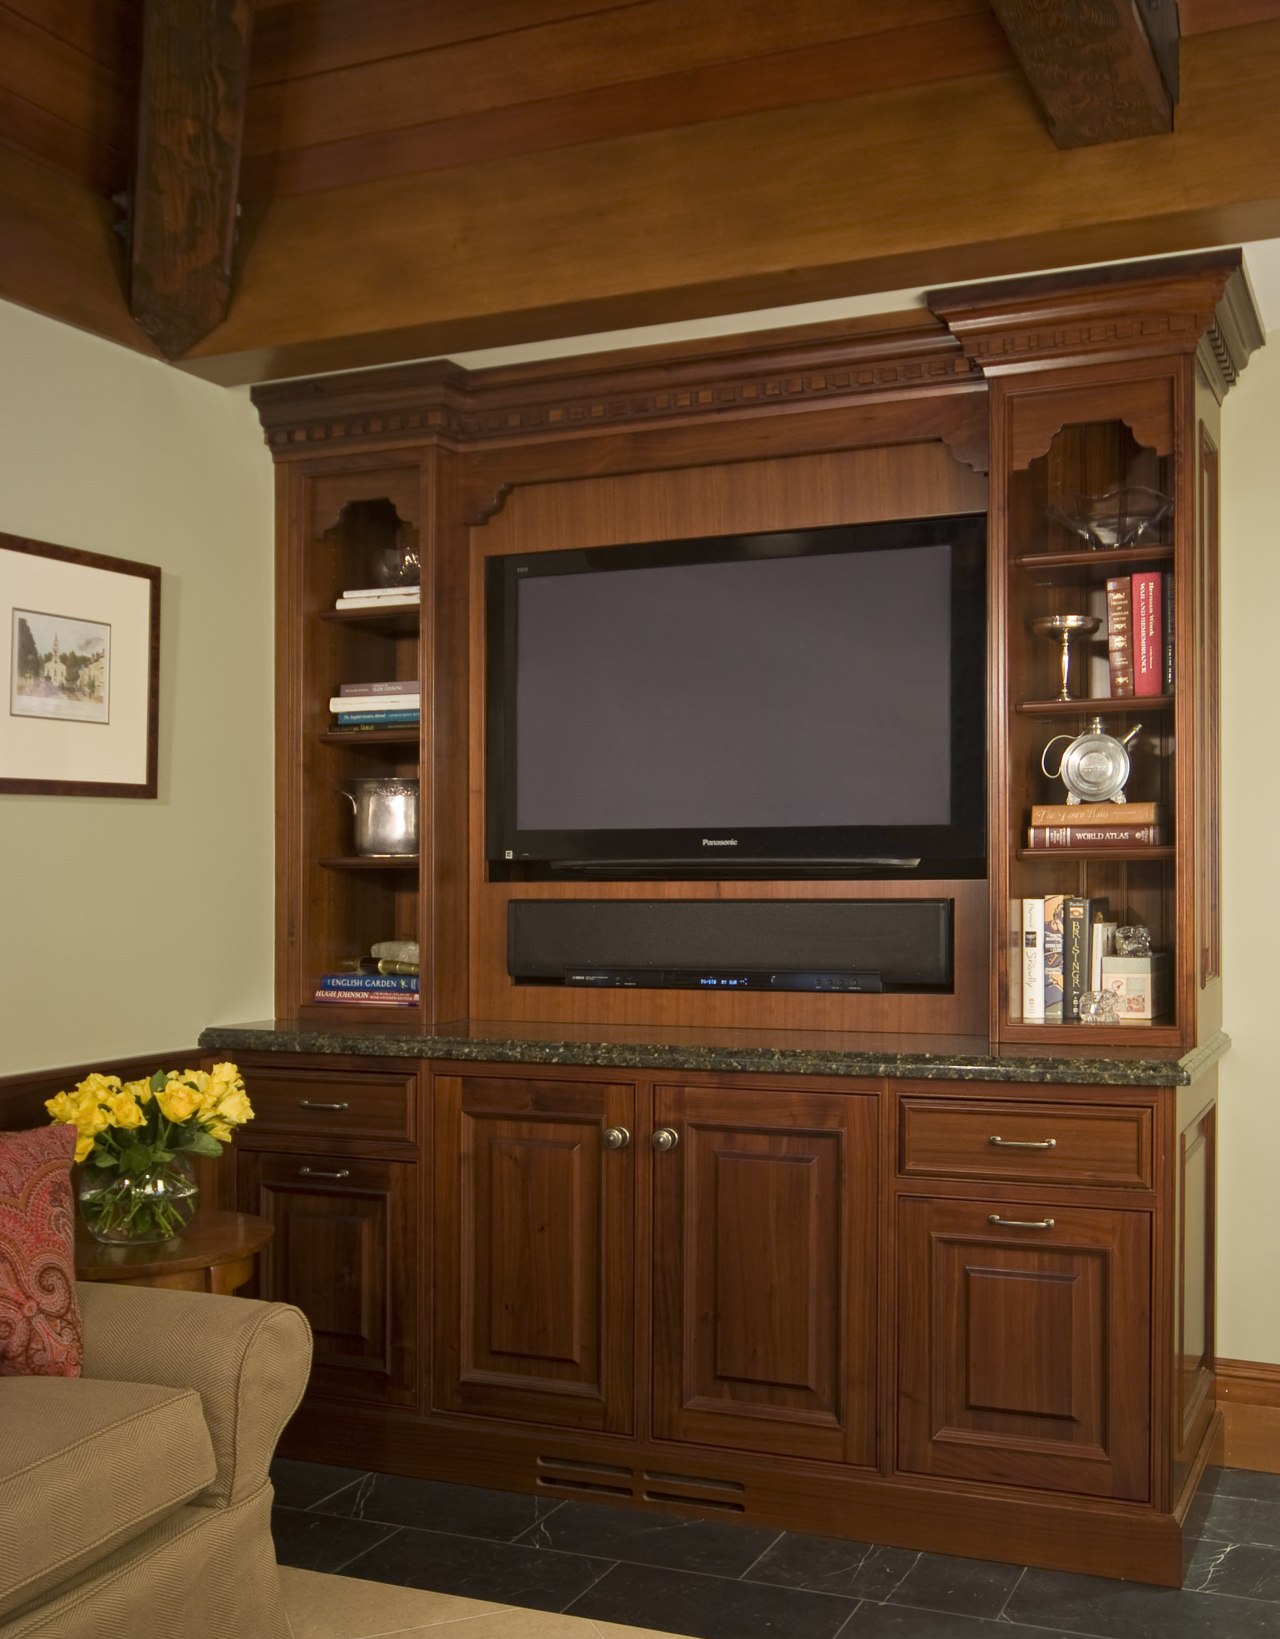 View of a traditional-styled dark-stained walnut television cabinet. cabinetry, entertainment, entertainment center, fireplace, furniture, hardwood, home, interior design, living room, wood stain, brown